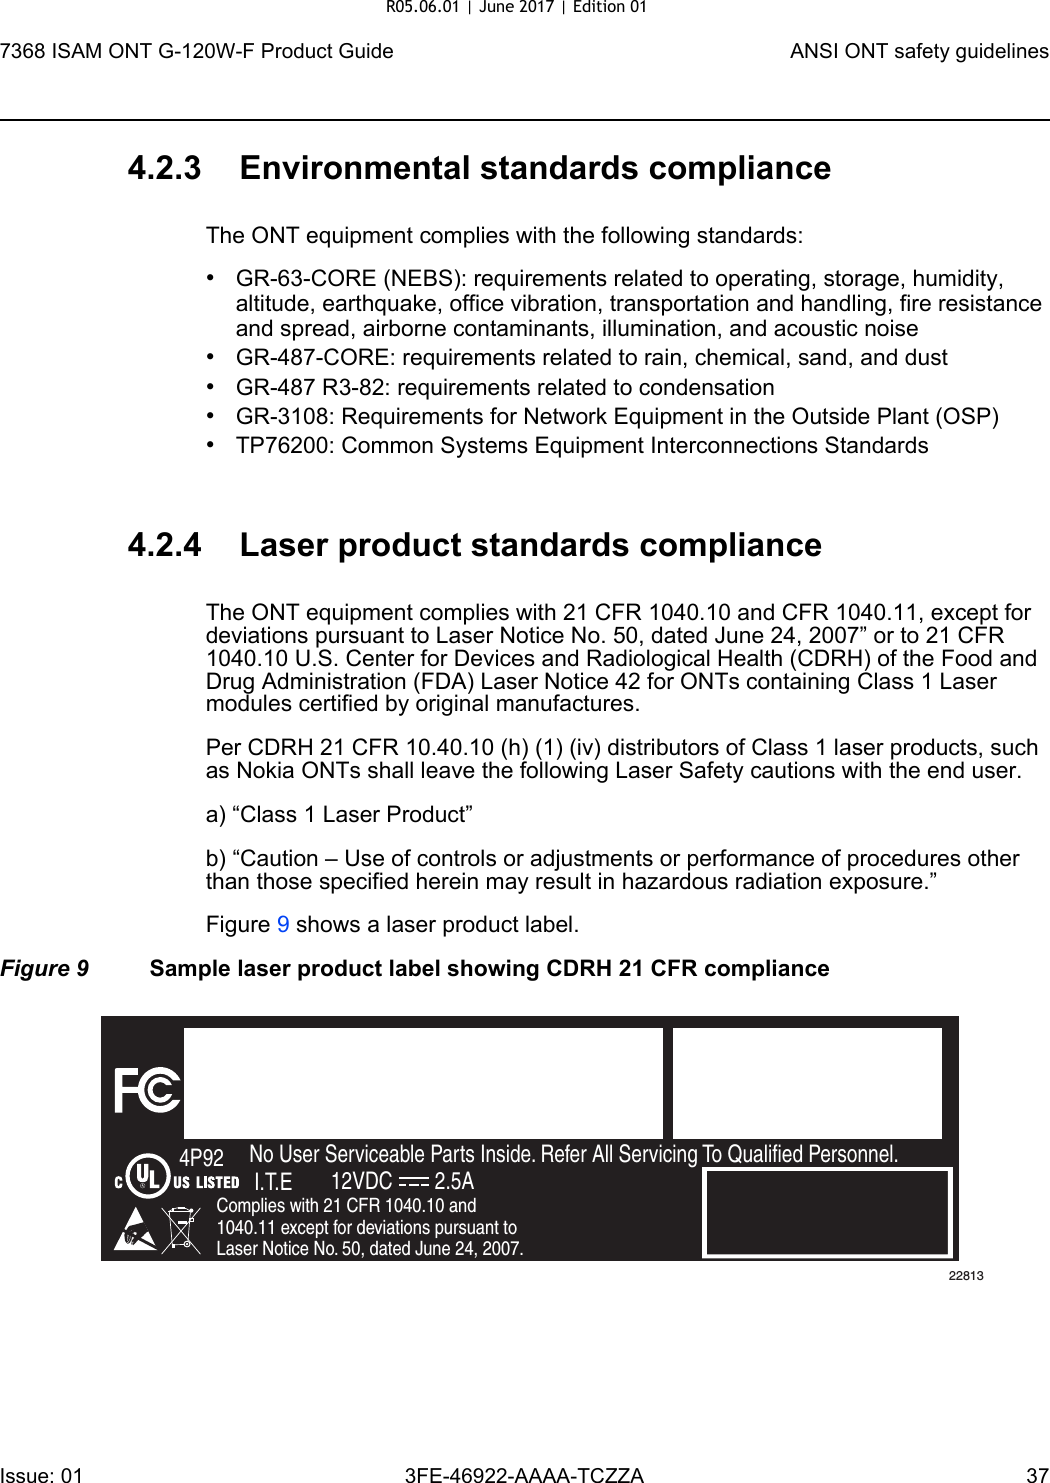 7368 ISAM ONT G-120W-F Product Guide ANSI ONT safety guidelinesIssue: 01 3FE-46922-AAAA-TCZZA 37 4.2.3 Environmental standards complianceThe ONT equipment complies with the following standards:•GR-63-CORE (NEBS): requirements related to operating, storage, humidity, altitude, earthquake, office vibration, transportation and handling, fire resistance and spread, airborne contaminants, illumination, and acoustic noise•GR-487-CORE: requirements related to rain, chemical, sand, and dust•GR-487 R3-82: requirements related to condensation •GR-3108: Requirements for Network Equipment in the Outside Plant (OSP)•TP76200: Common Systems Equipment Interconnections Standards4.2.4 Laser product standards complianceThe ONT equipment complies with 21 CFR 1040.10 and CFR 1040.11, except for deviations pursuant to Laser Notice No. 50, dated June 24, 2007” or to 21 CFR 1040.10 U.S. Center for Devices and Radiological Health (CDRH) of the Food and Drug Administration (FDA) Laser Notice 42 for ONTs containing Class 1 Laser modules certified by original manufactures.Per CDRH 21 CFR 10.40.10 (h) (1) (iv) distributors of Class 1 laser products, such as Nokia ONTs shall leave the following Laser Safety cautions with the end user.a) “Class 1 Laser Product”b) “Caution – Use of controls or adjustments or performance of procedures other than those specified herein may result in hazardous radiation exposure.”Figure 9 shows a laser product label.Figure 9 Sample laser product label showing CDRH 21 CFR complianceFiOS EnabledTo Order FiOS: 888 GET-FiOSor visit Verizon.comFor Service: 888 553-15552301 Sugar Bush Rd.Raleigh, NC 27612No User Serviceable Parts Inside. Refer All Servicing To Qualified Personnel.Complies with 21 CFR 1040.10 and 1040.11 except for deviations pursuant to Laser Notice No. 50, dated June 24, 2007.4P92I.T.E 12VDC 2.5A22813R05.06.01 | June 2017 | Edition 01 